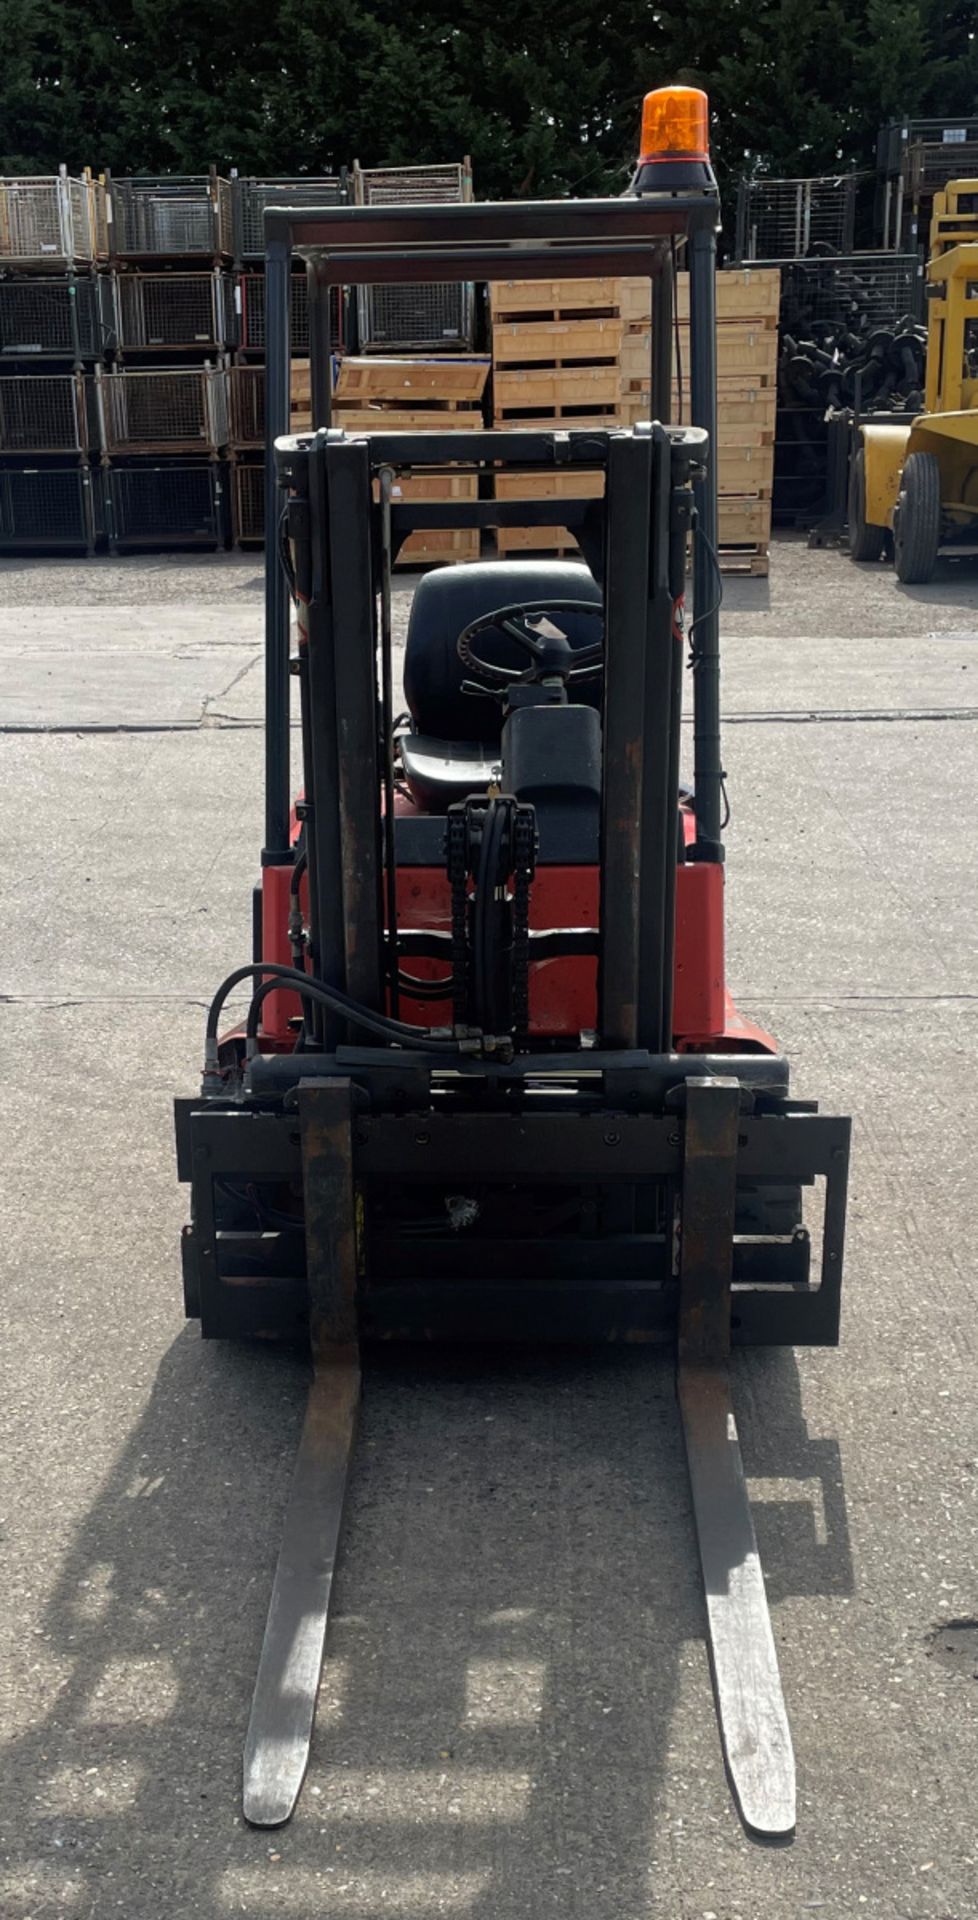 Linde AG E15 electric forklift - 1.5T - deadweight 2880 kg - 1954 hours used - no charger - Image 4 of 16